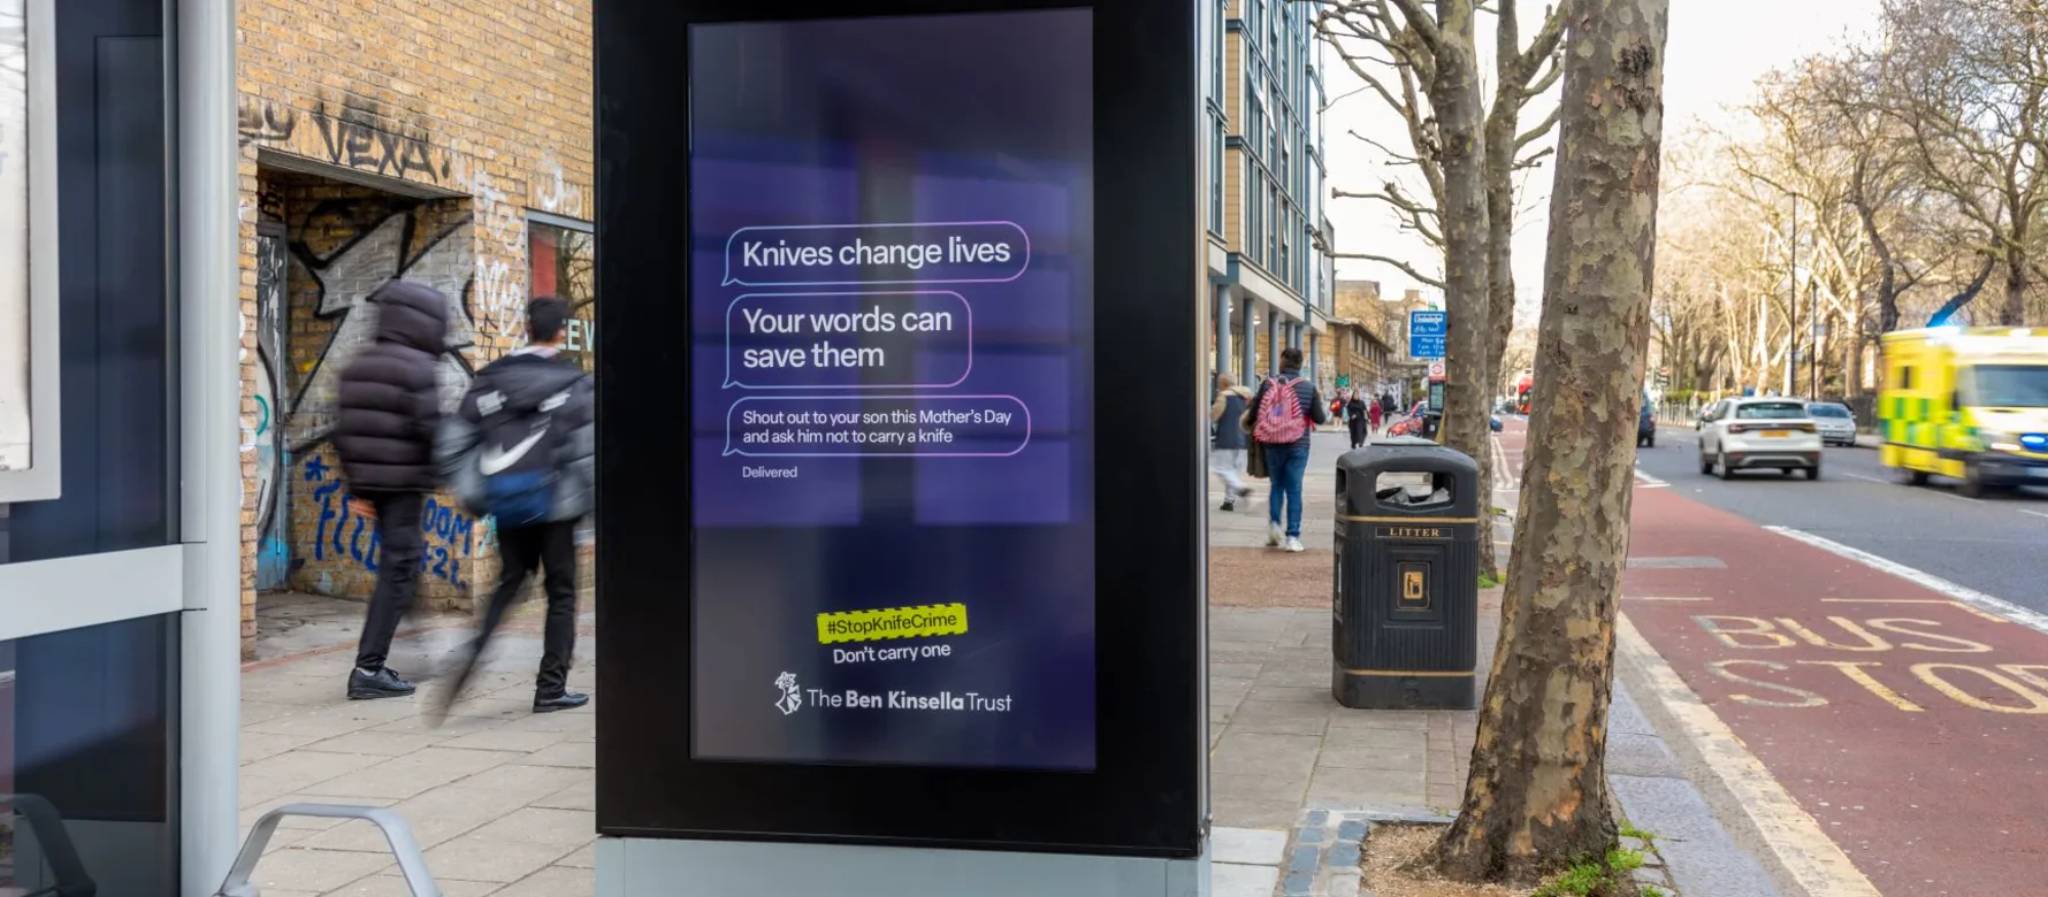 AI Mother's Day billboards tackle knife crime in the UK